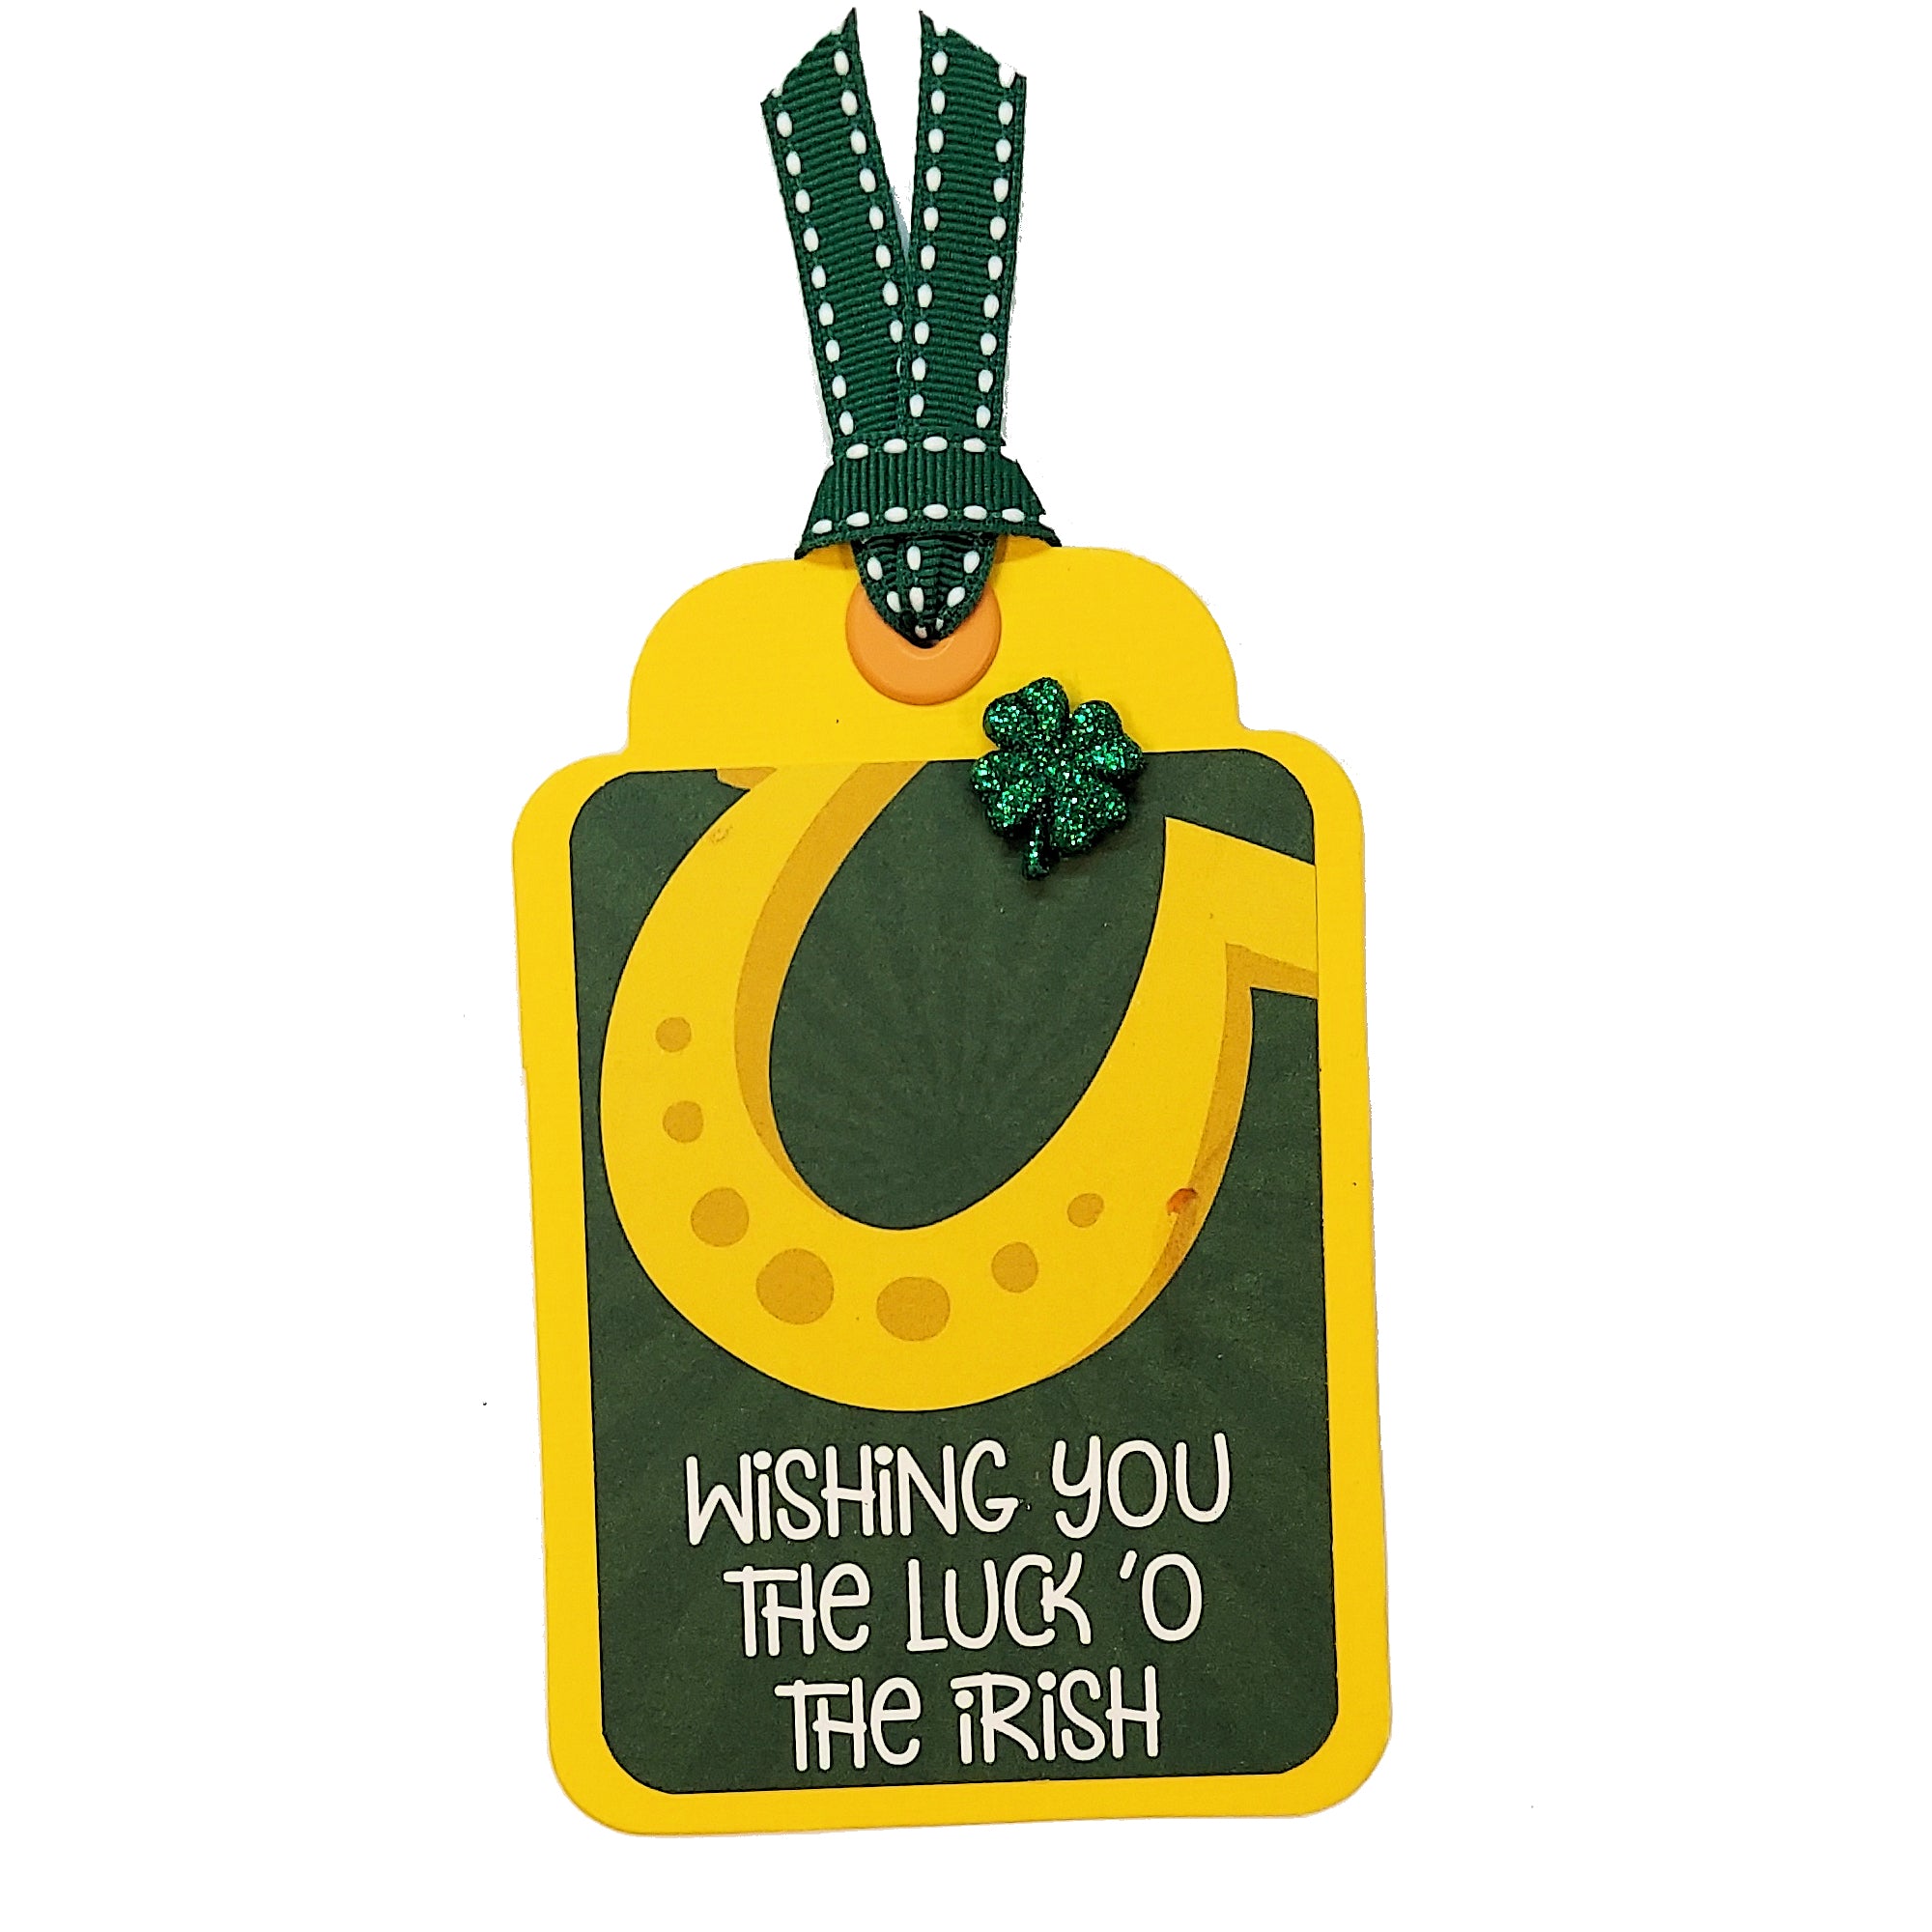 Wishing You The Luck Of The Irish Tag 3 x 5 Coordinating Scrapbook Tag Embellishment by SSC Designs